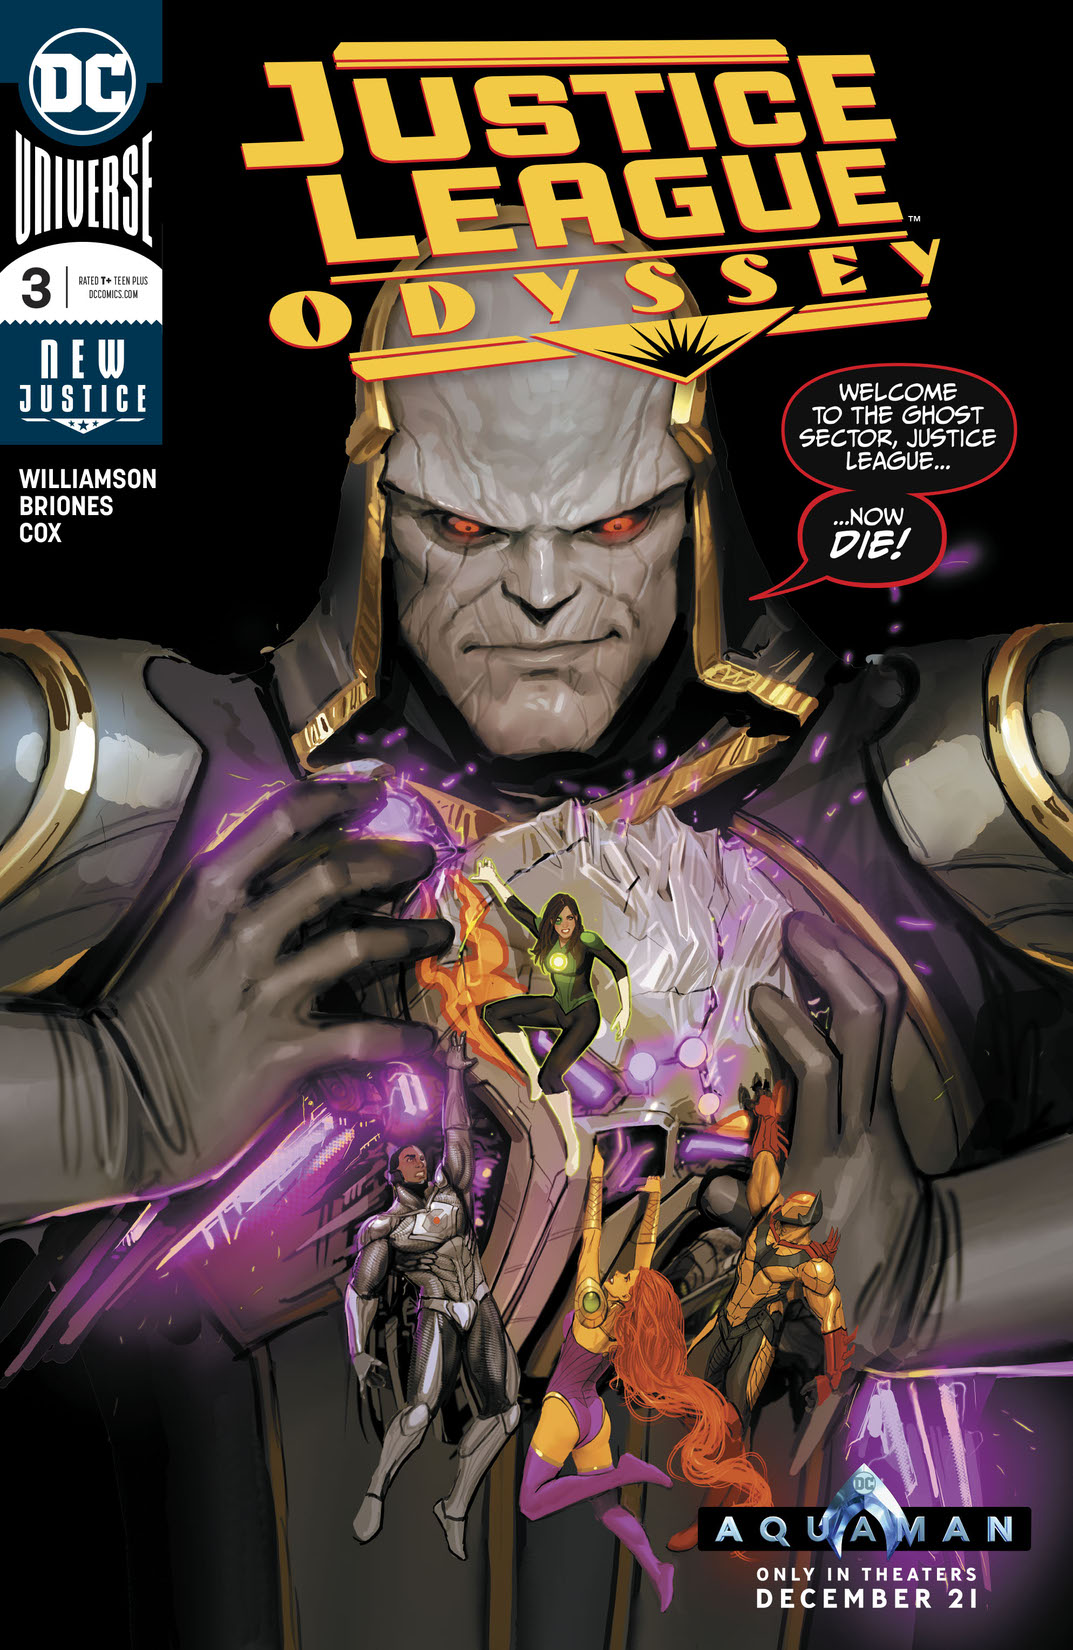 Justice League Odyssey #3 preview images